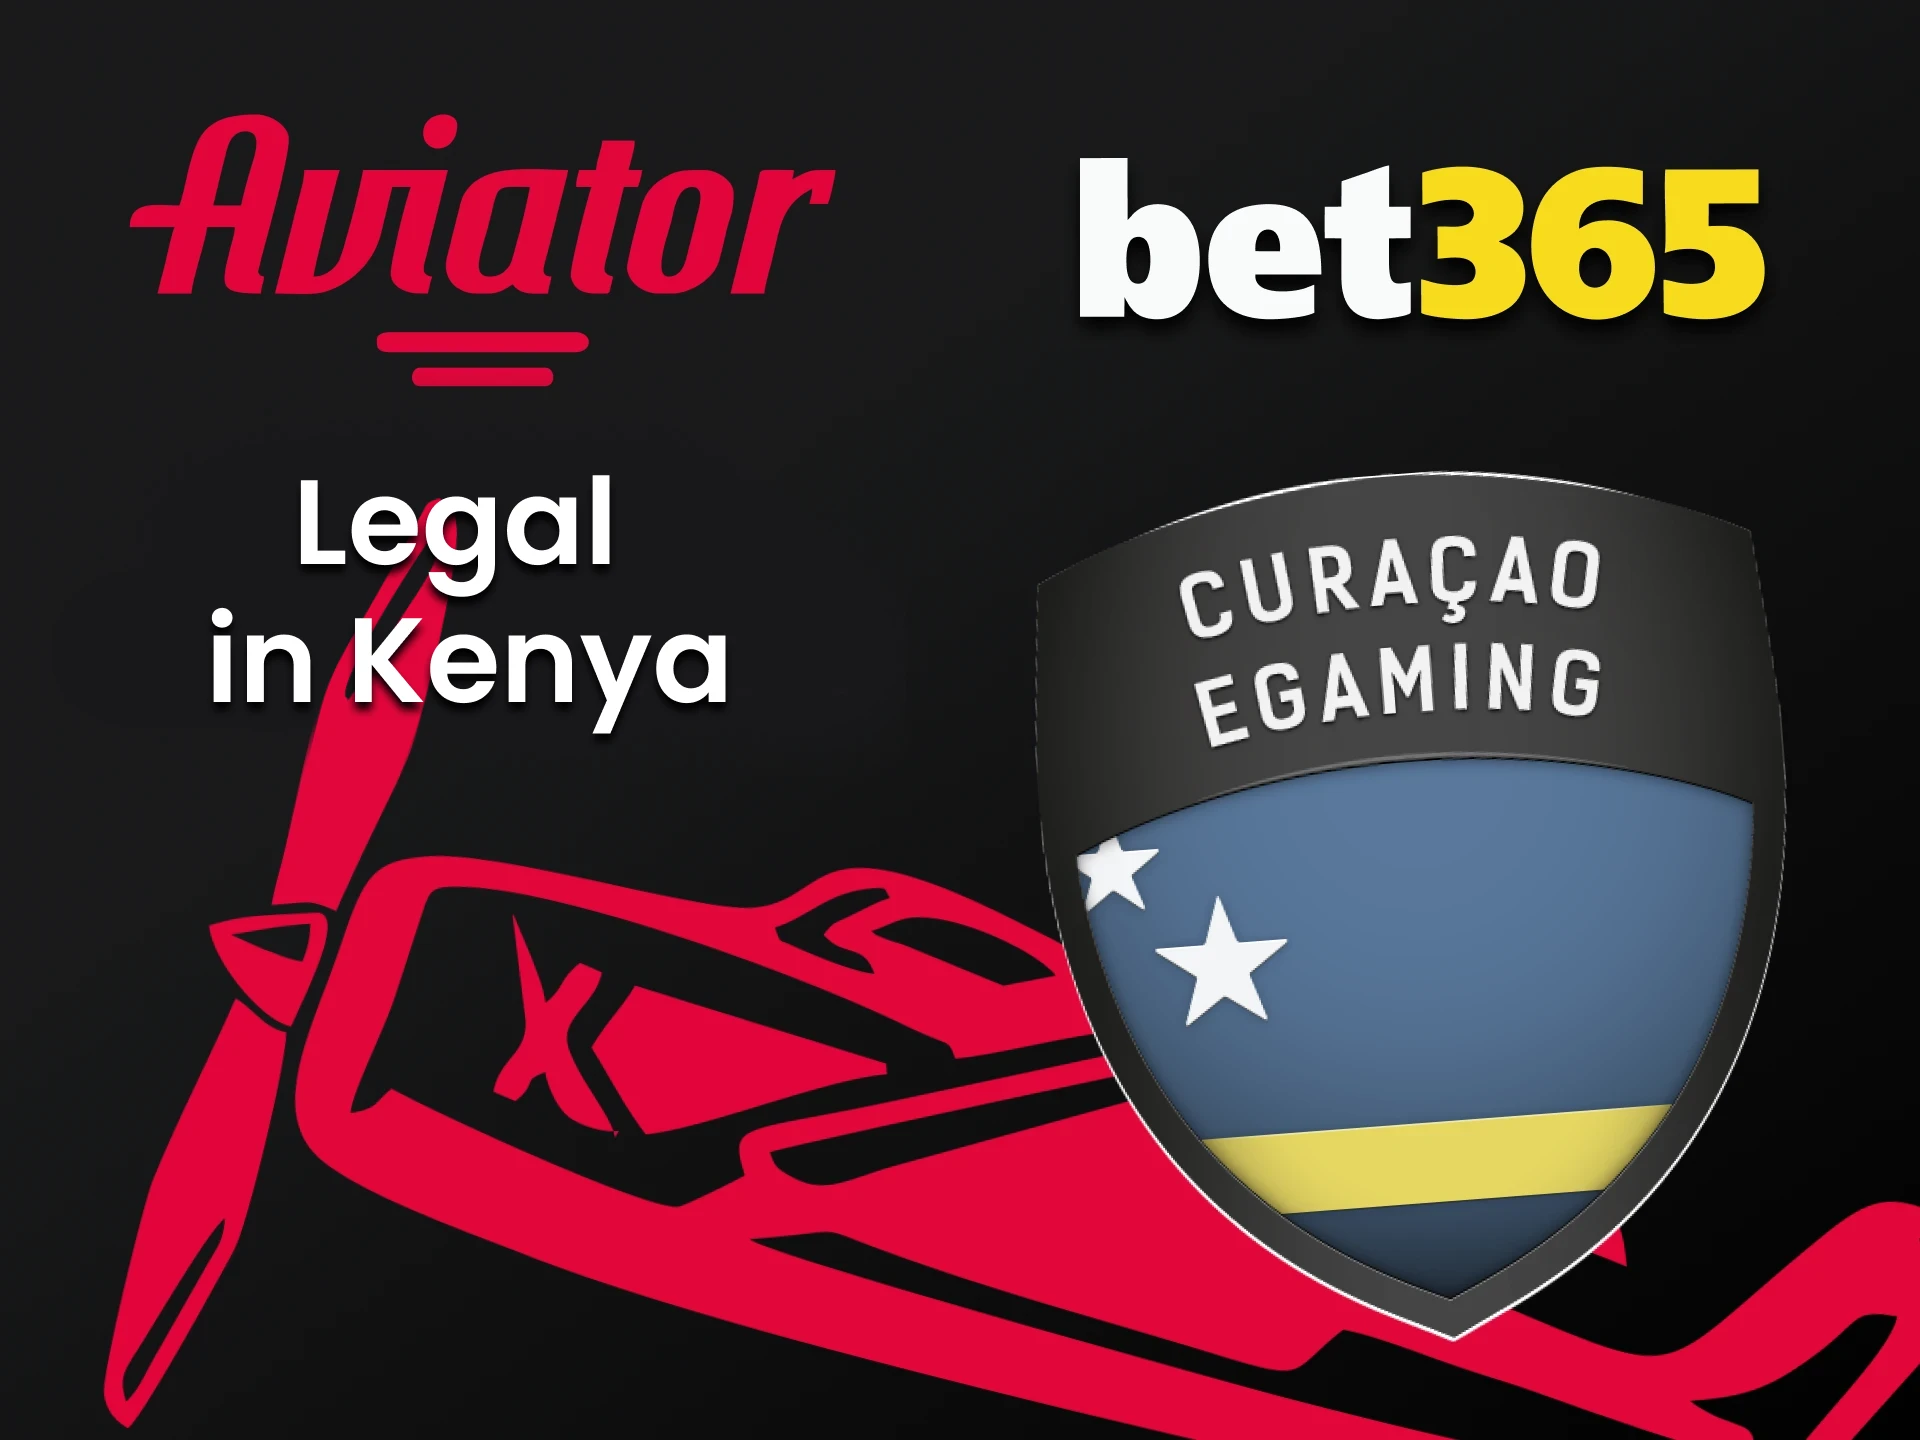 Bet365 is absolutely legal to play Aviator.